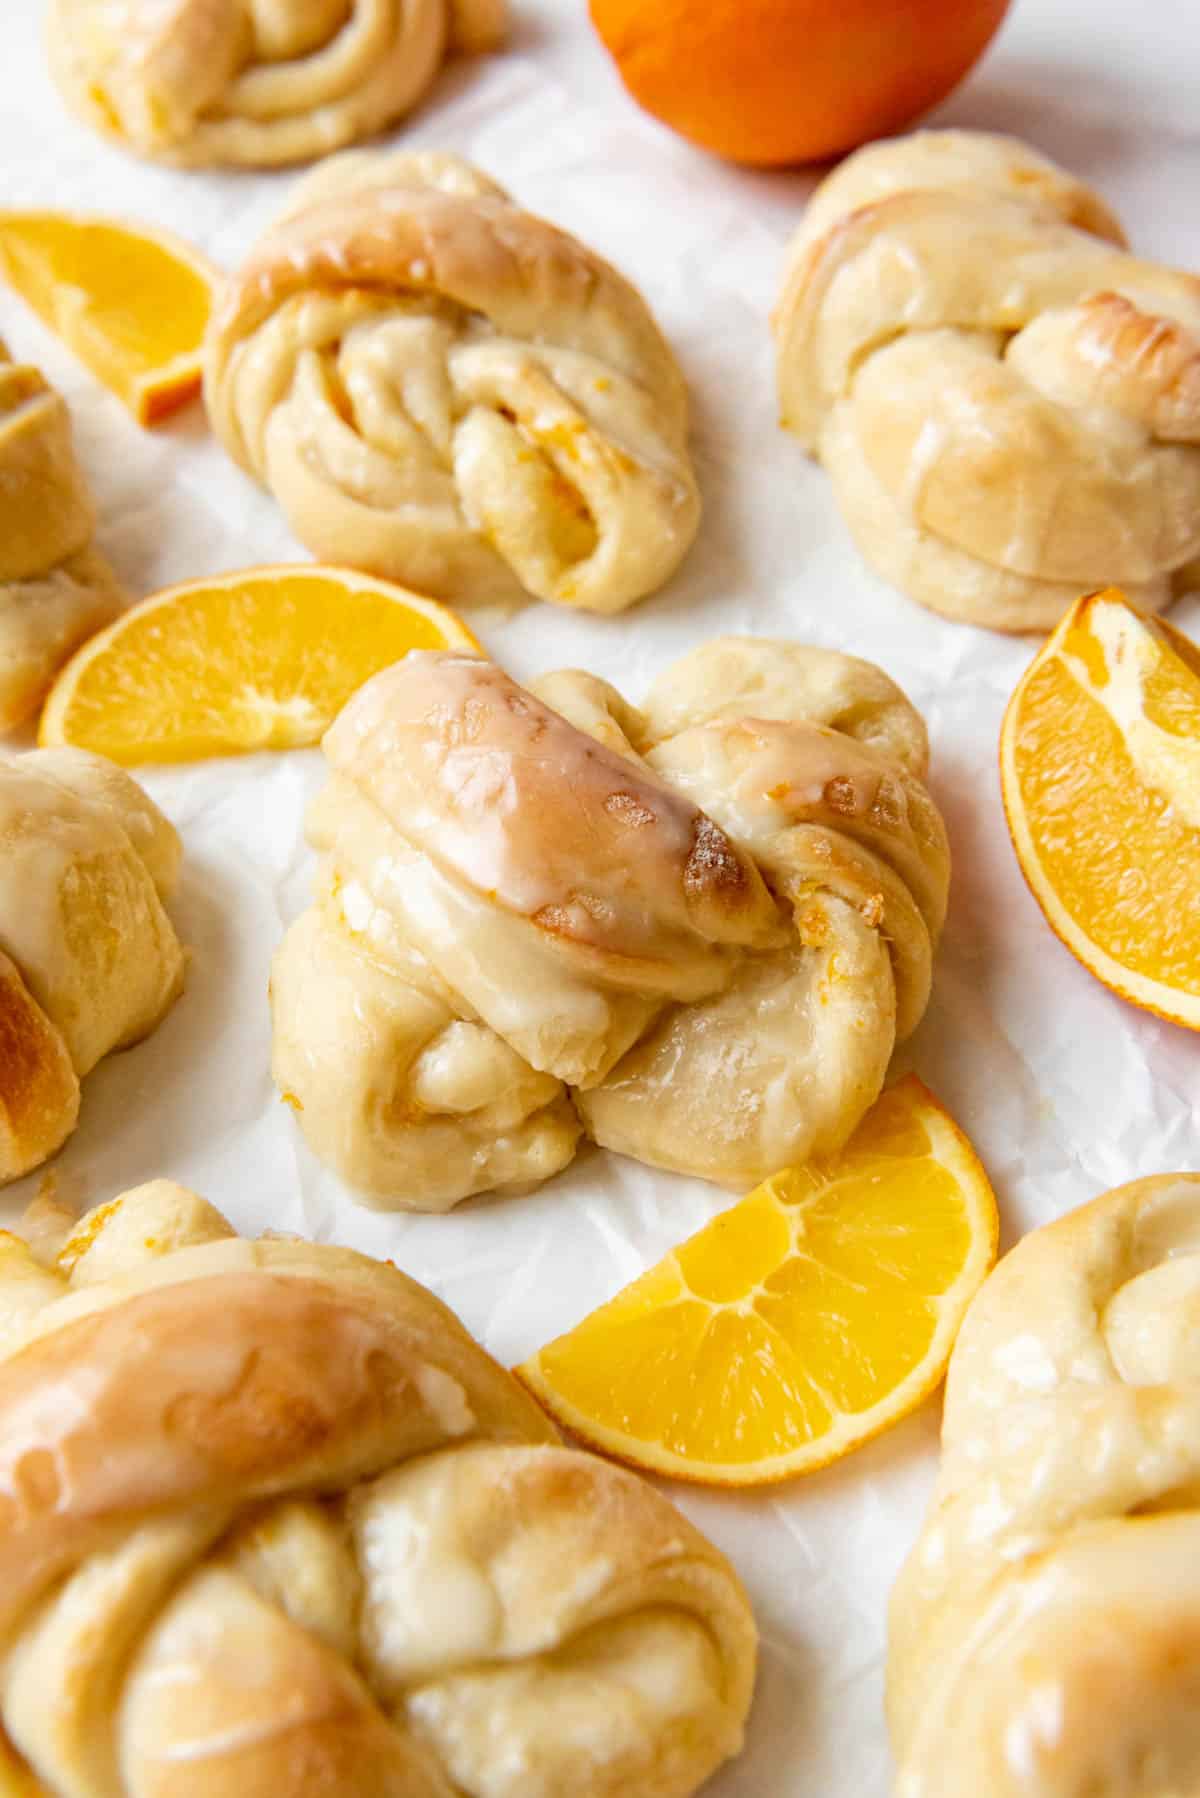 A knotted orange sweet roll on a white surface next to orange slices.